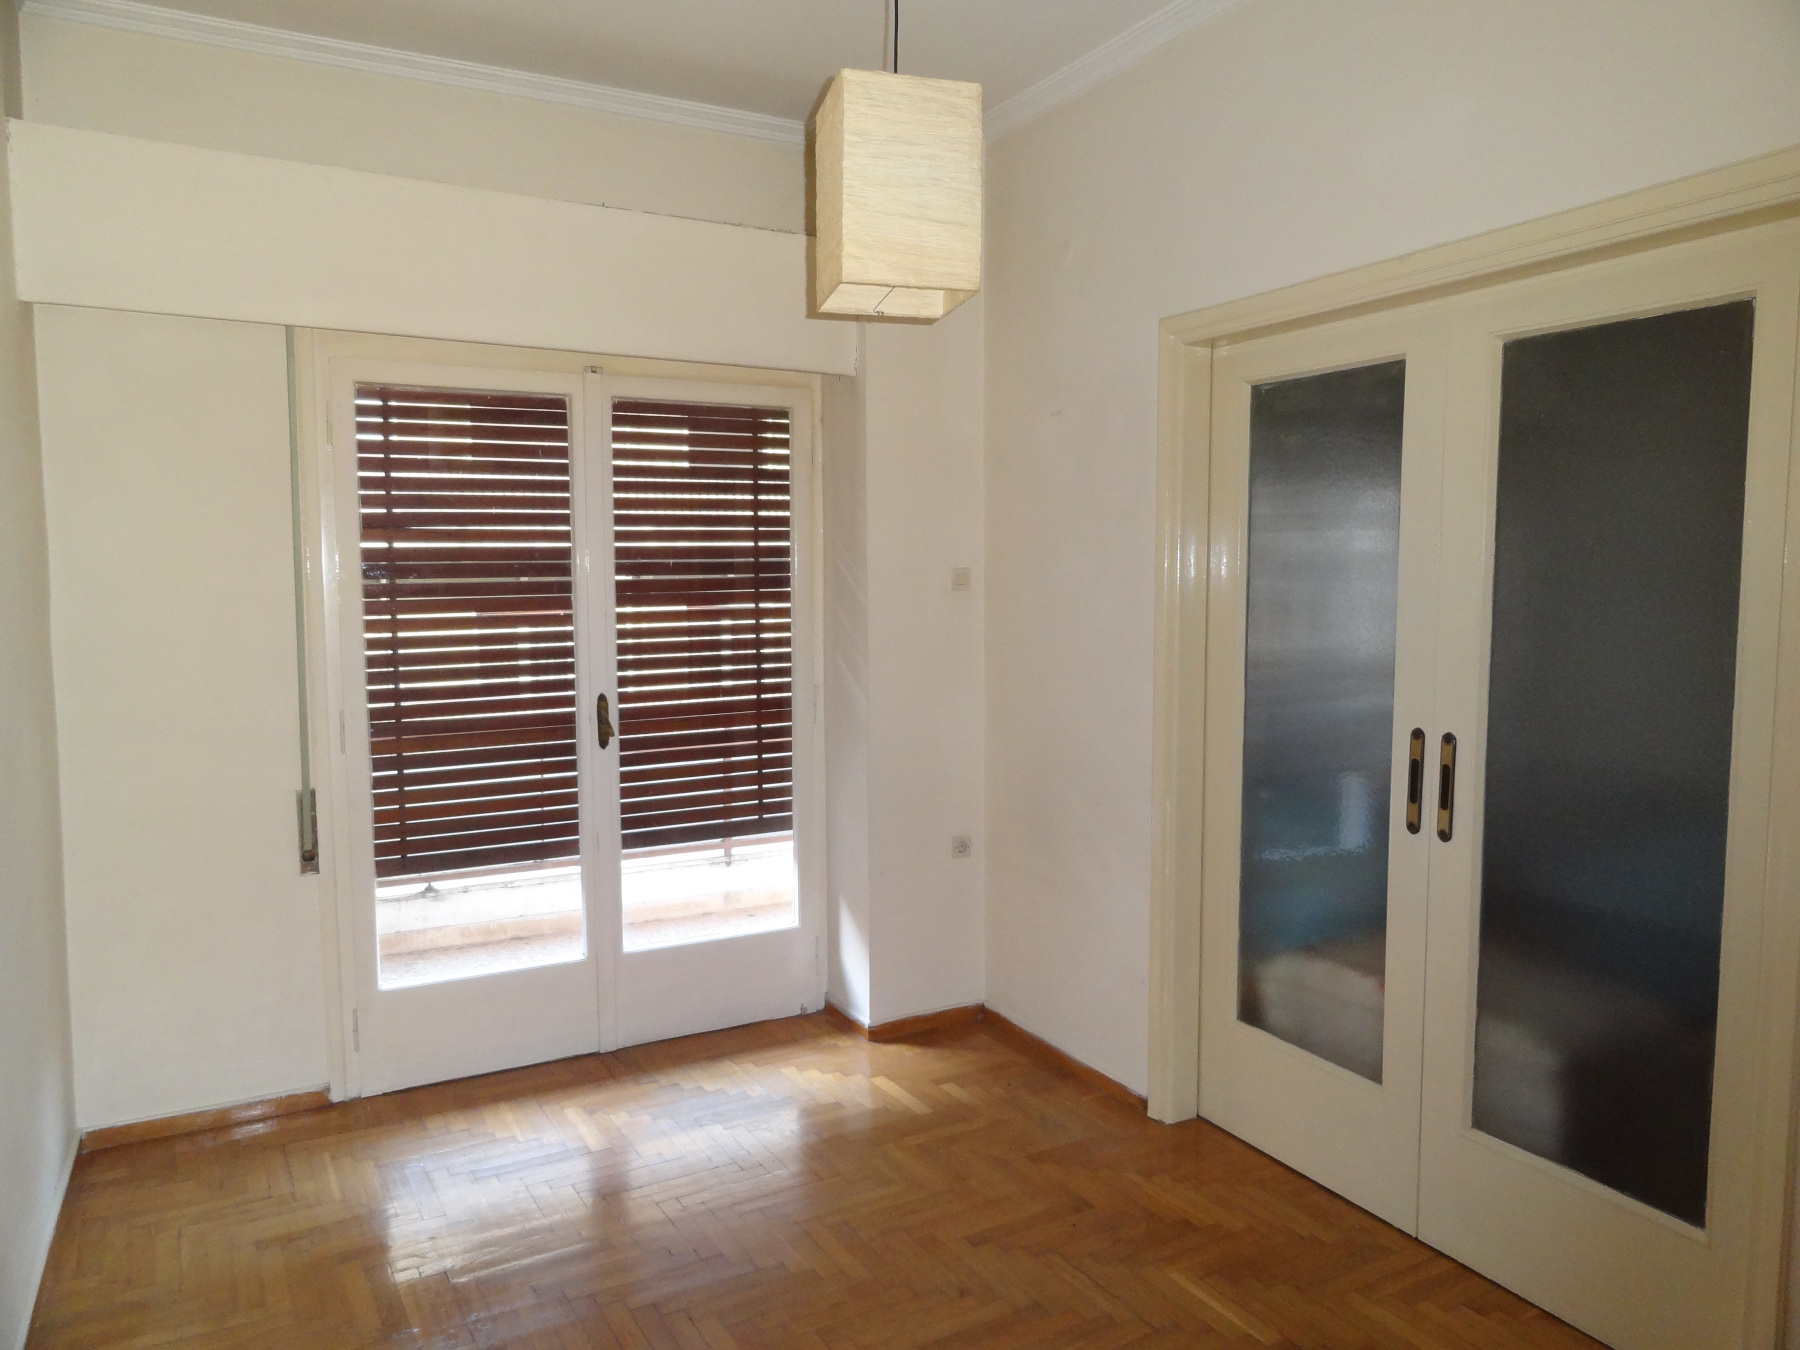 1 bedroom apartment for rent, 57 sq.m. 2nd floor in the center of Ioannina in Pargis square